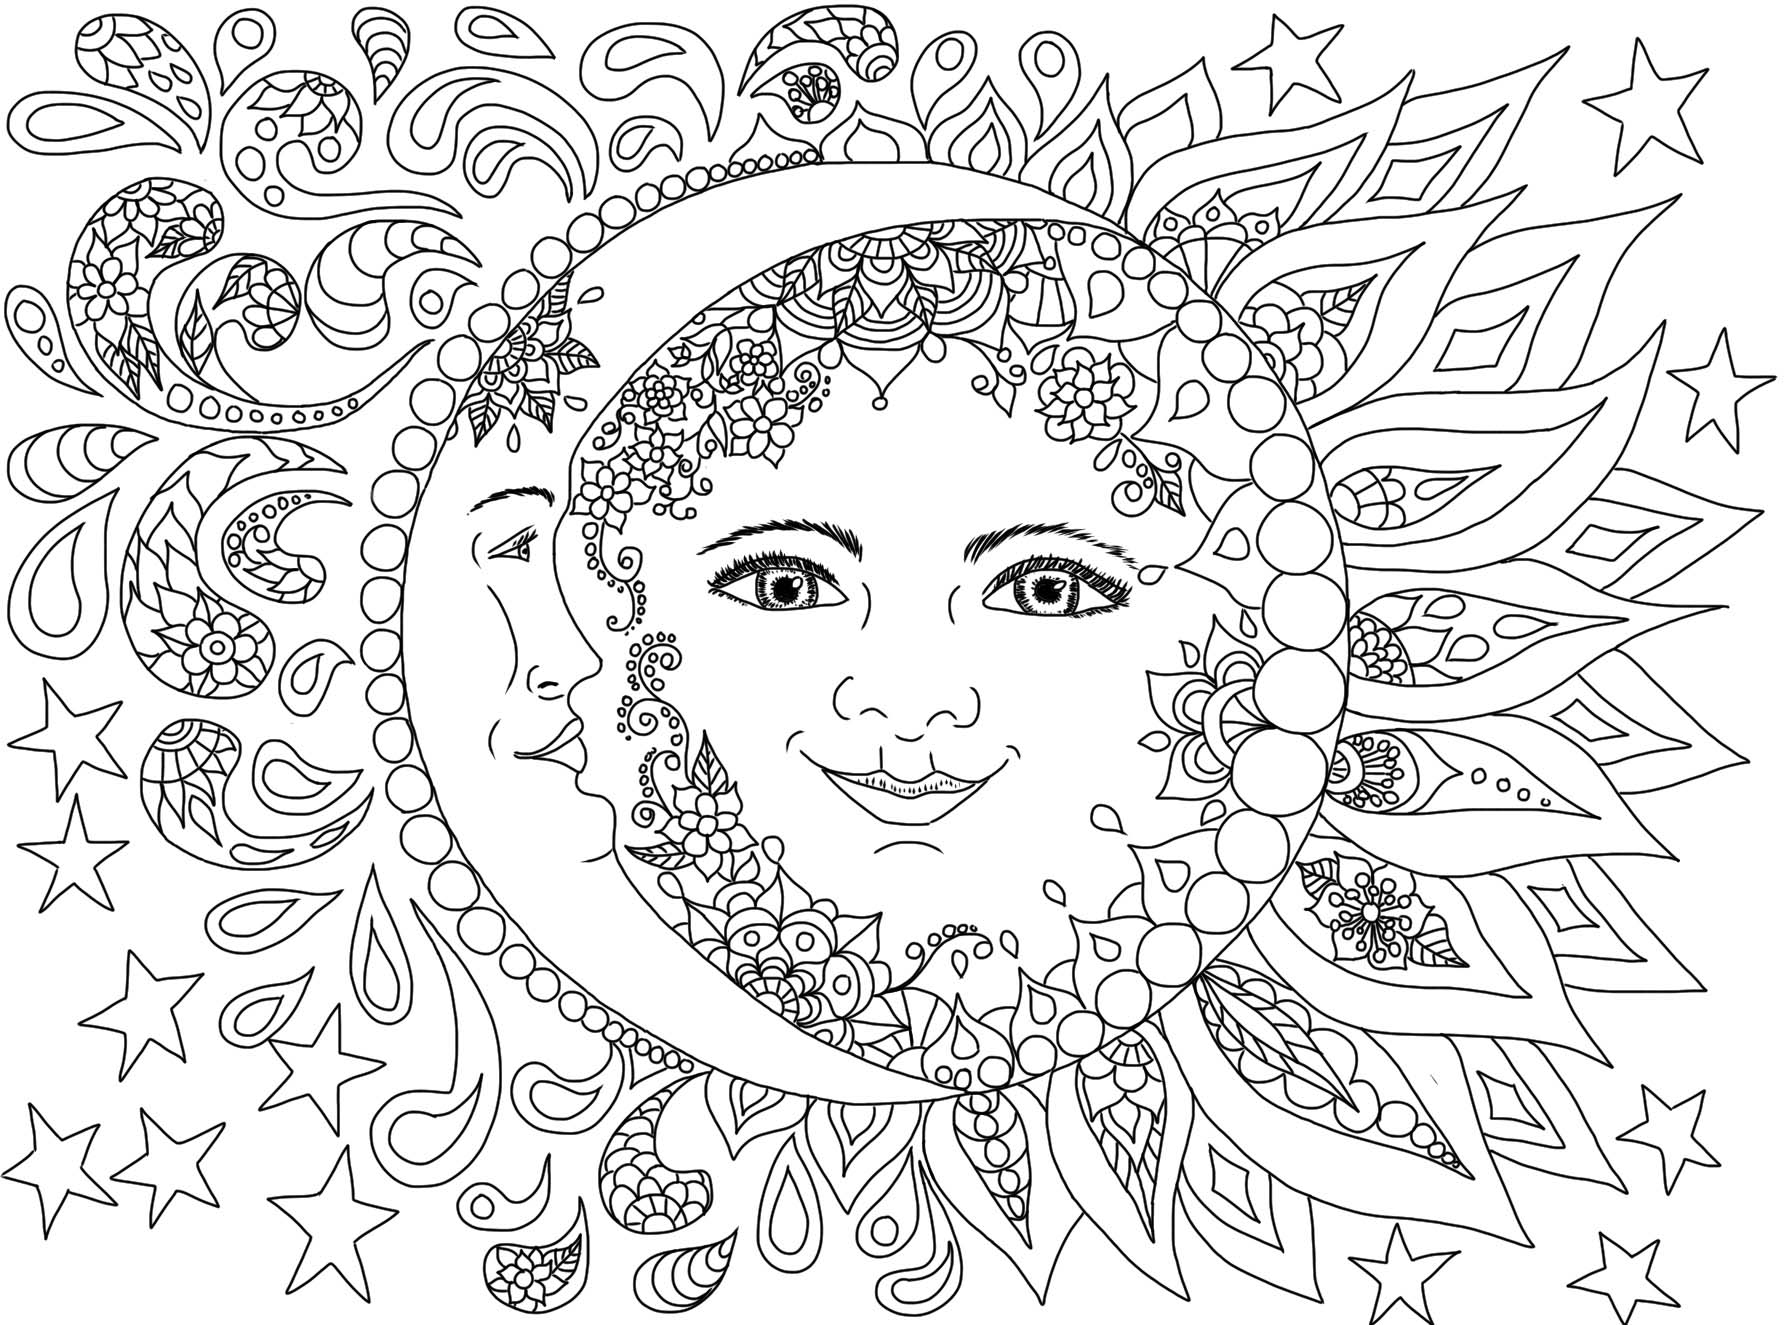 October coloring page | Free Printable Coloring Pages